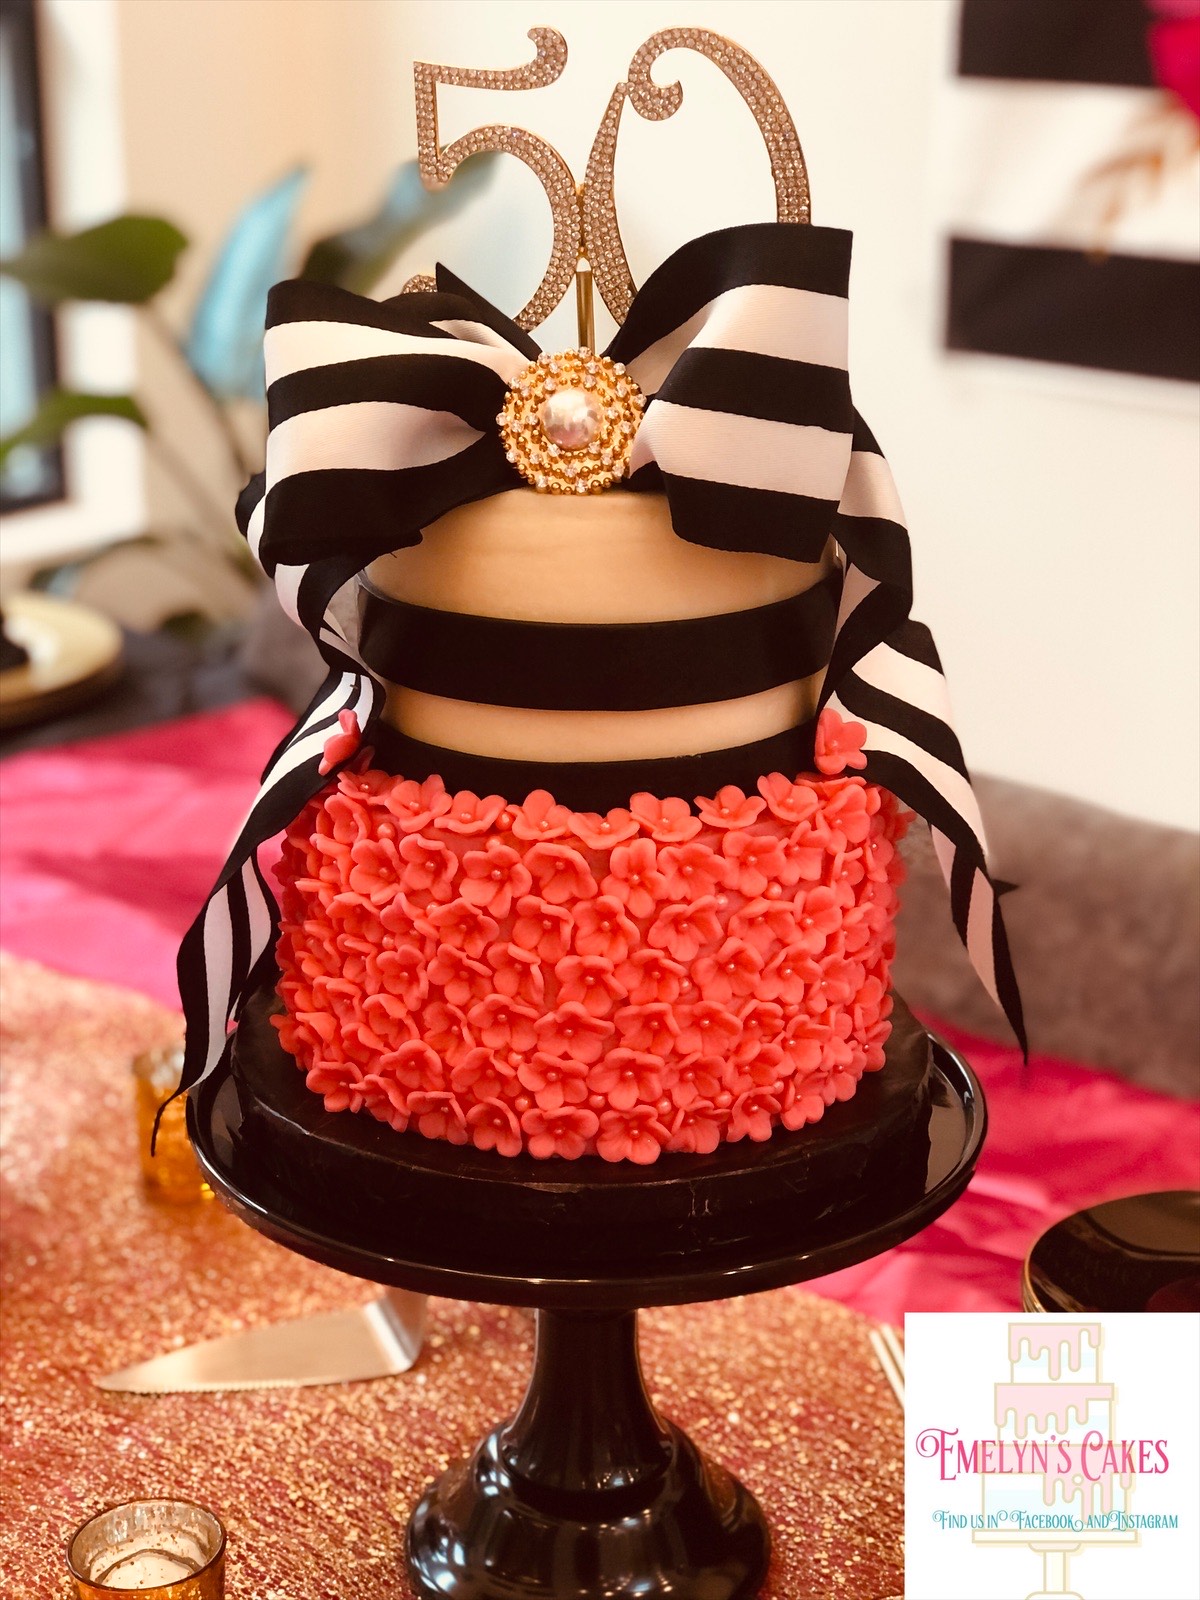 Cake by Emelyn’s Cakes